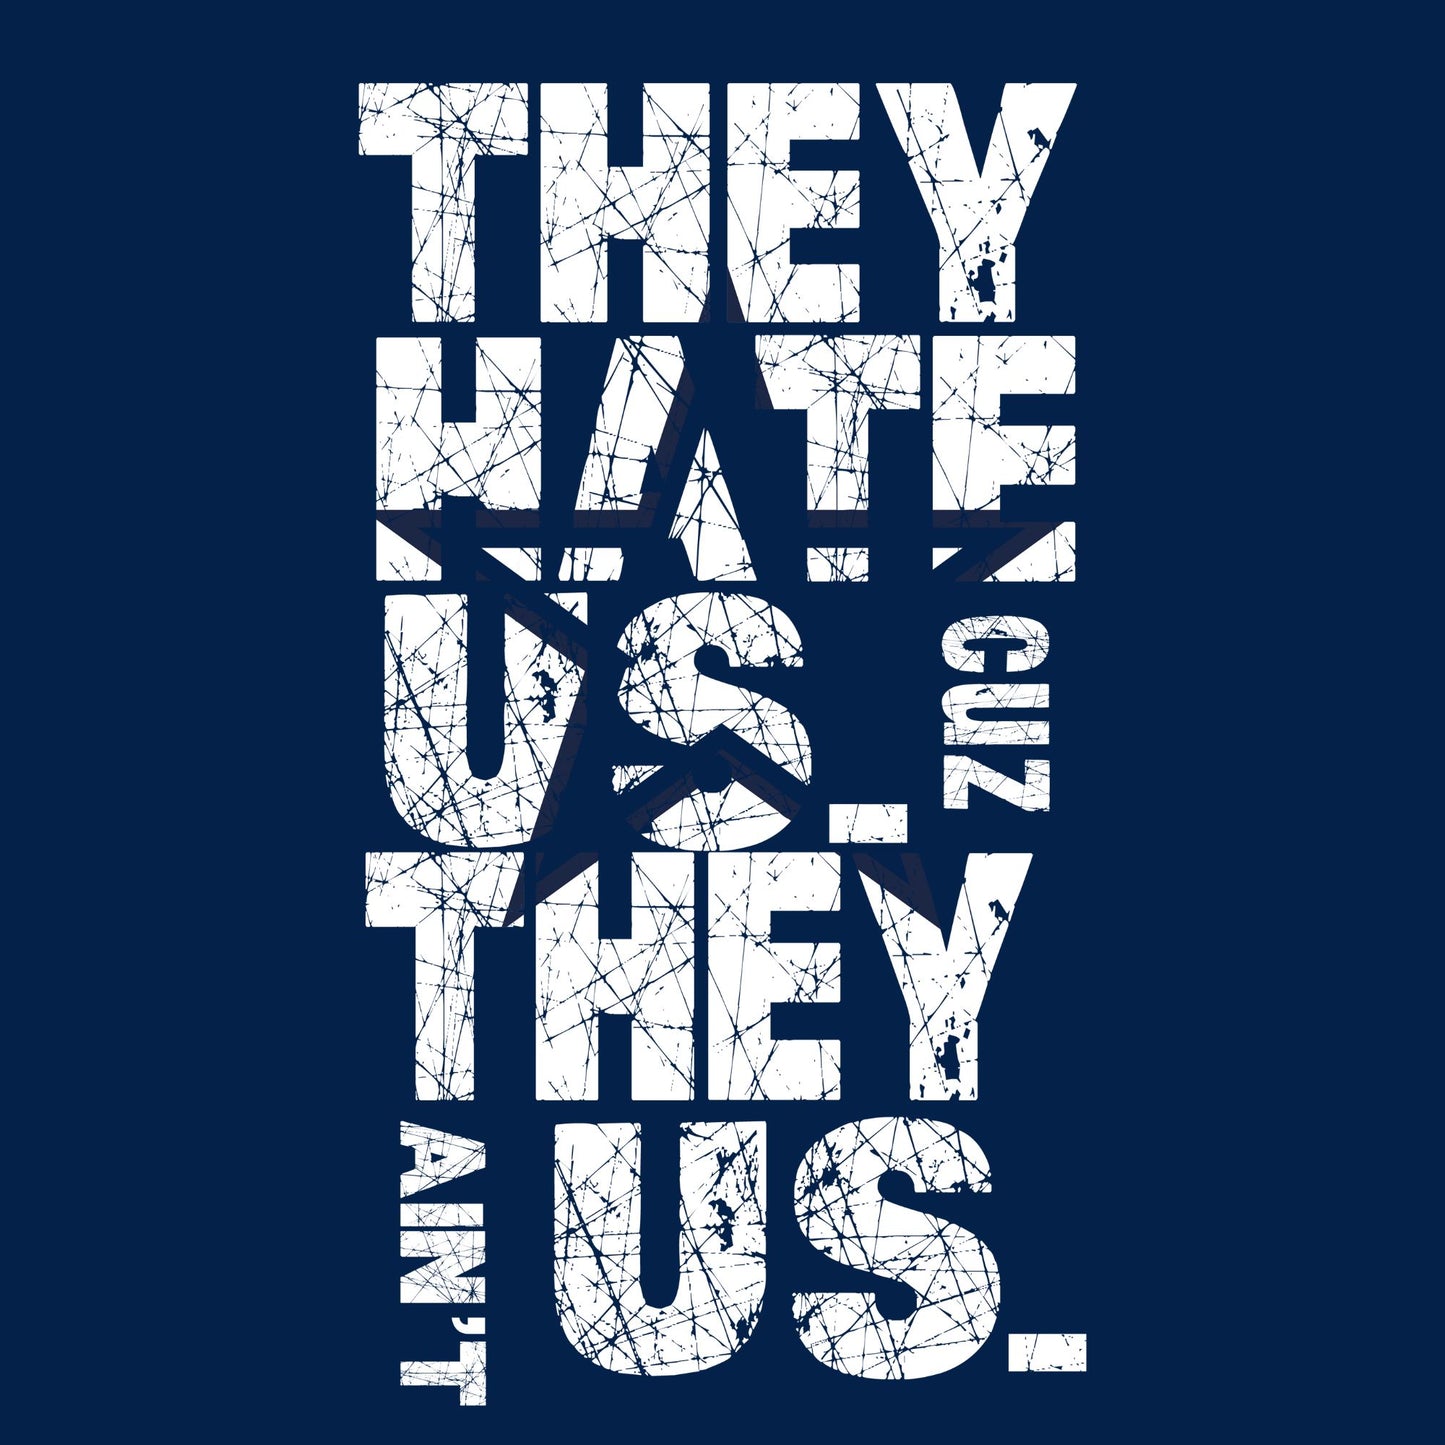 Dallas Football: 'They Hate Us 'Cause They Ain't Us' T-Shirt - Flaunt Your Team Pride with Exclusive Fan Apparel |